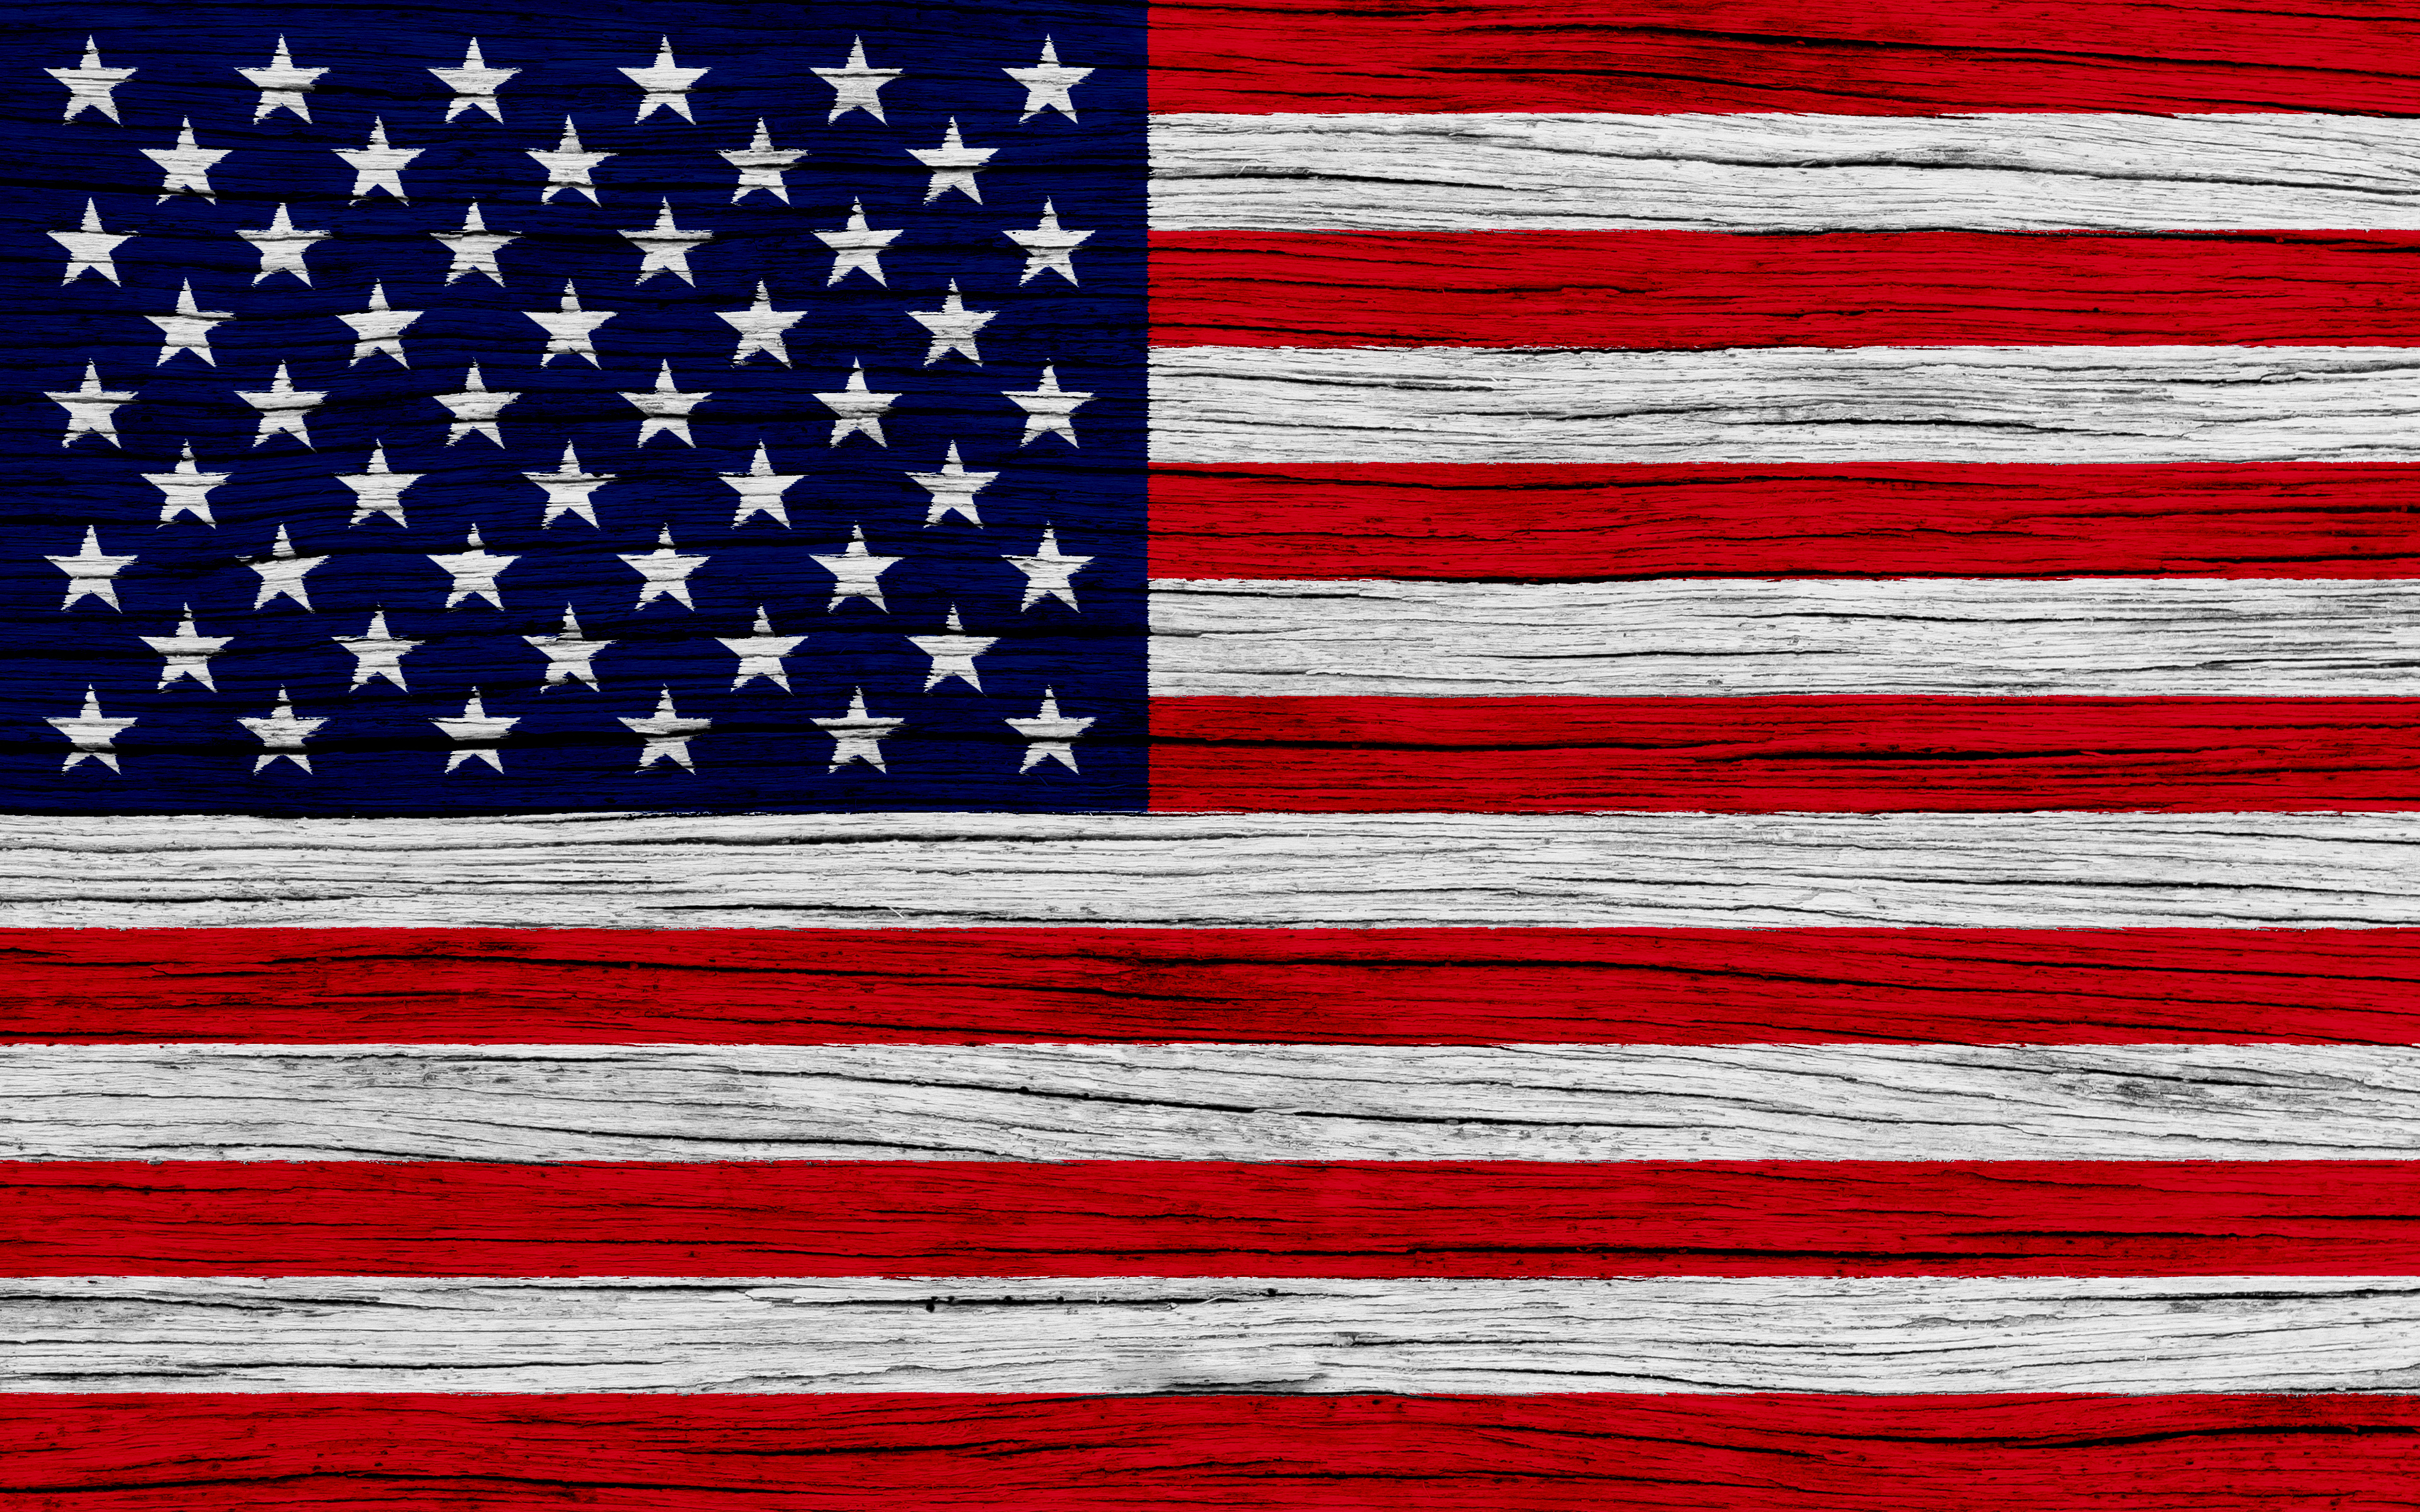 Lock Screen PC Wallpaper man made, american flag, flag, united states, flags